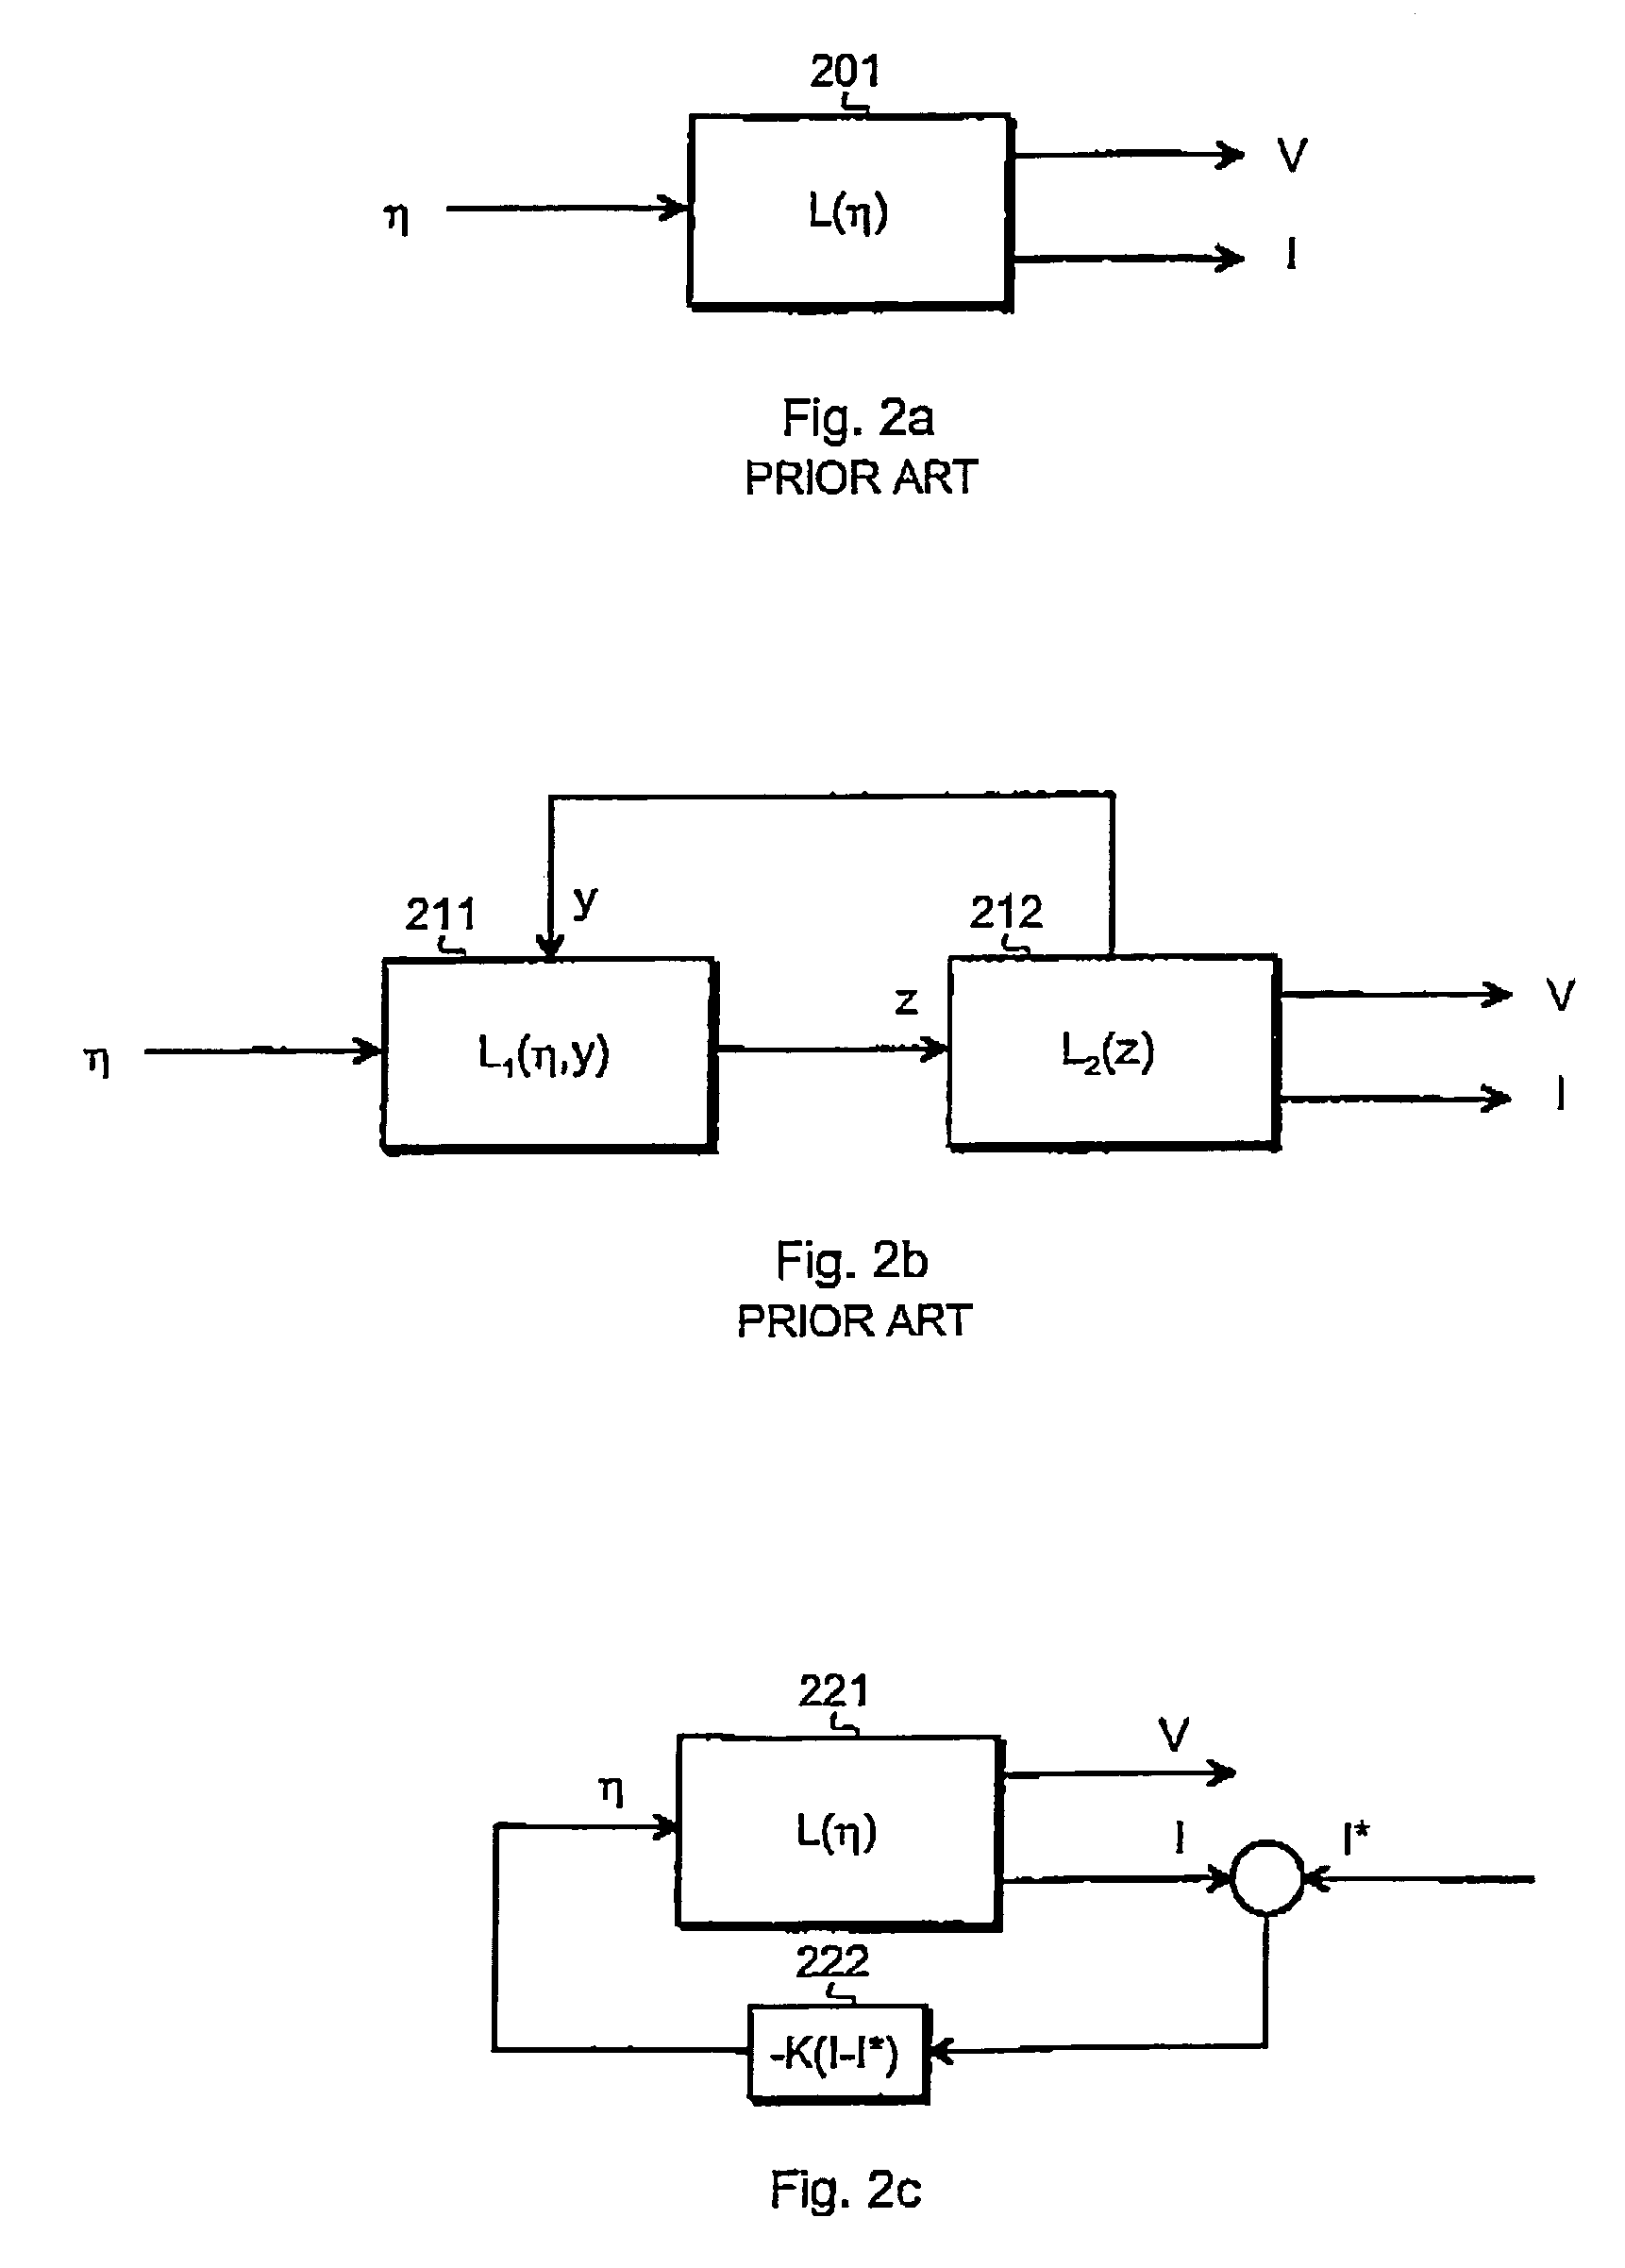 Method and apparatus for soft-sensor characterization of batteries